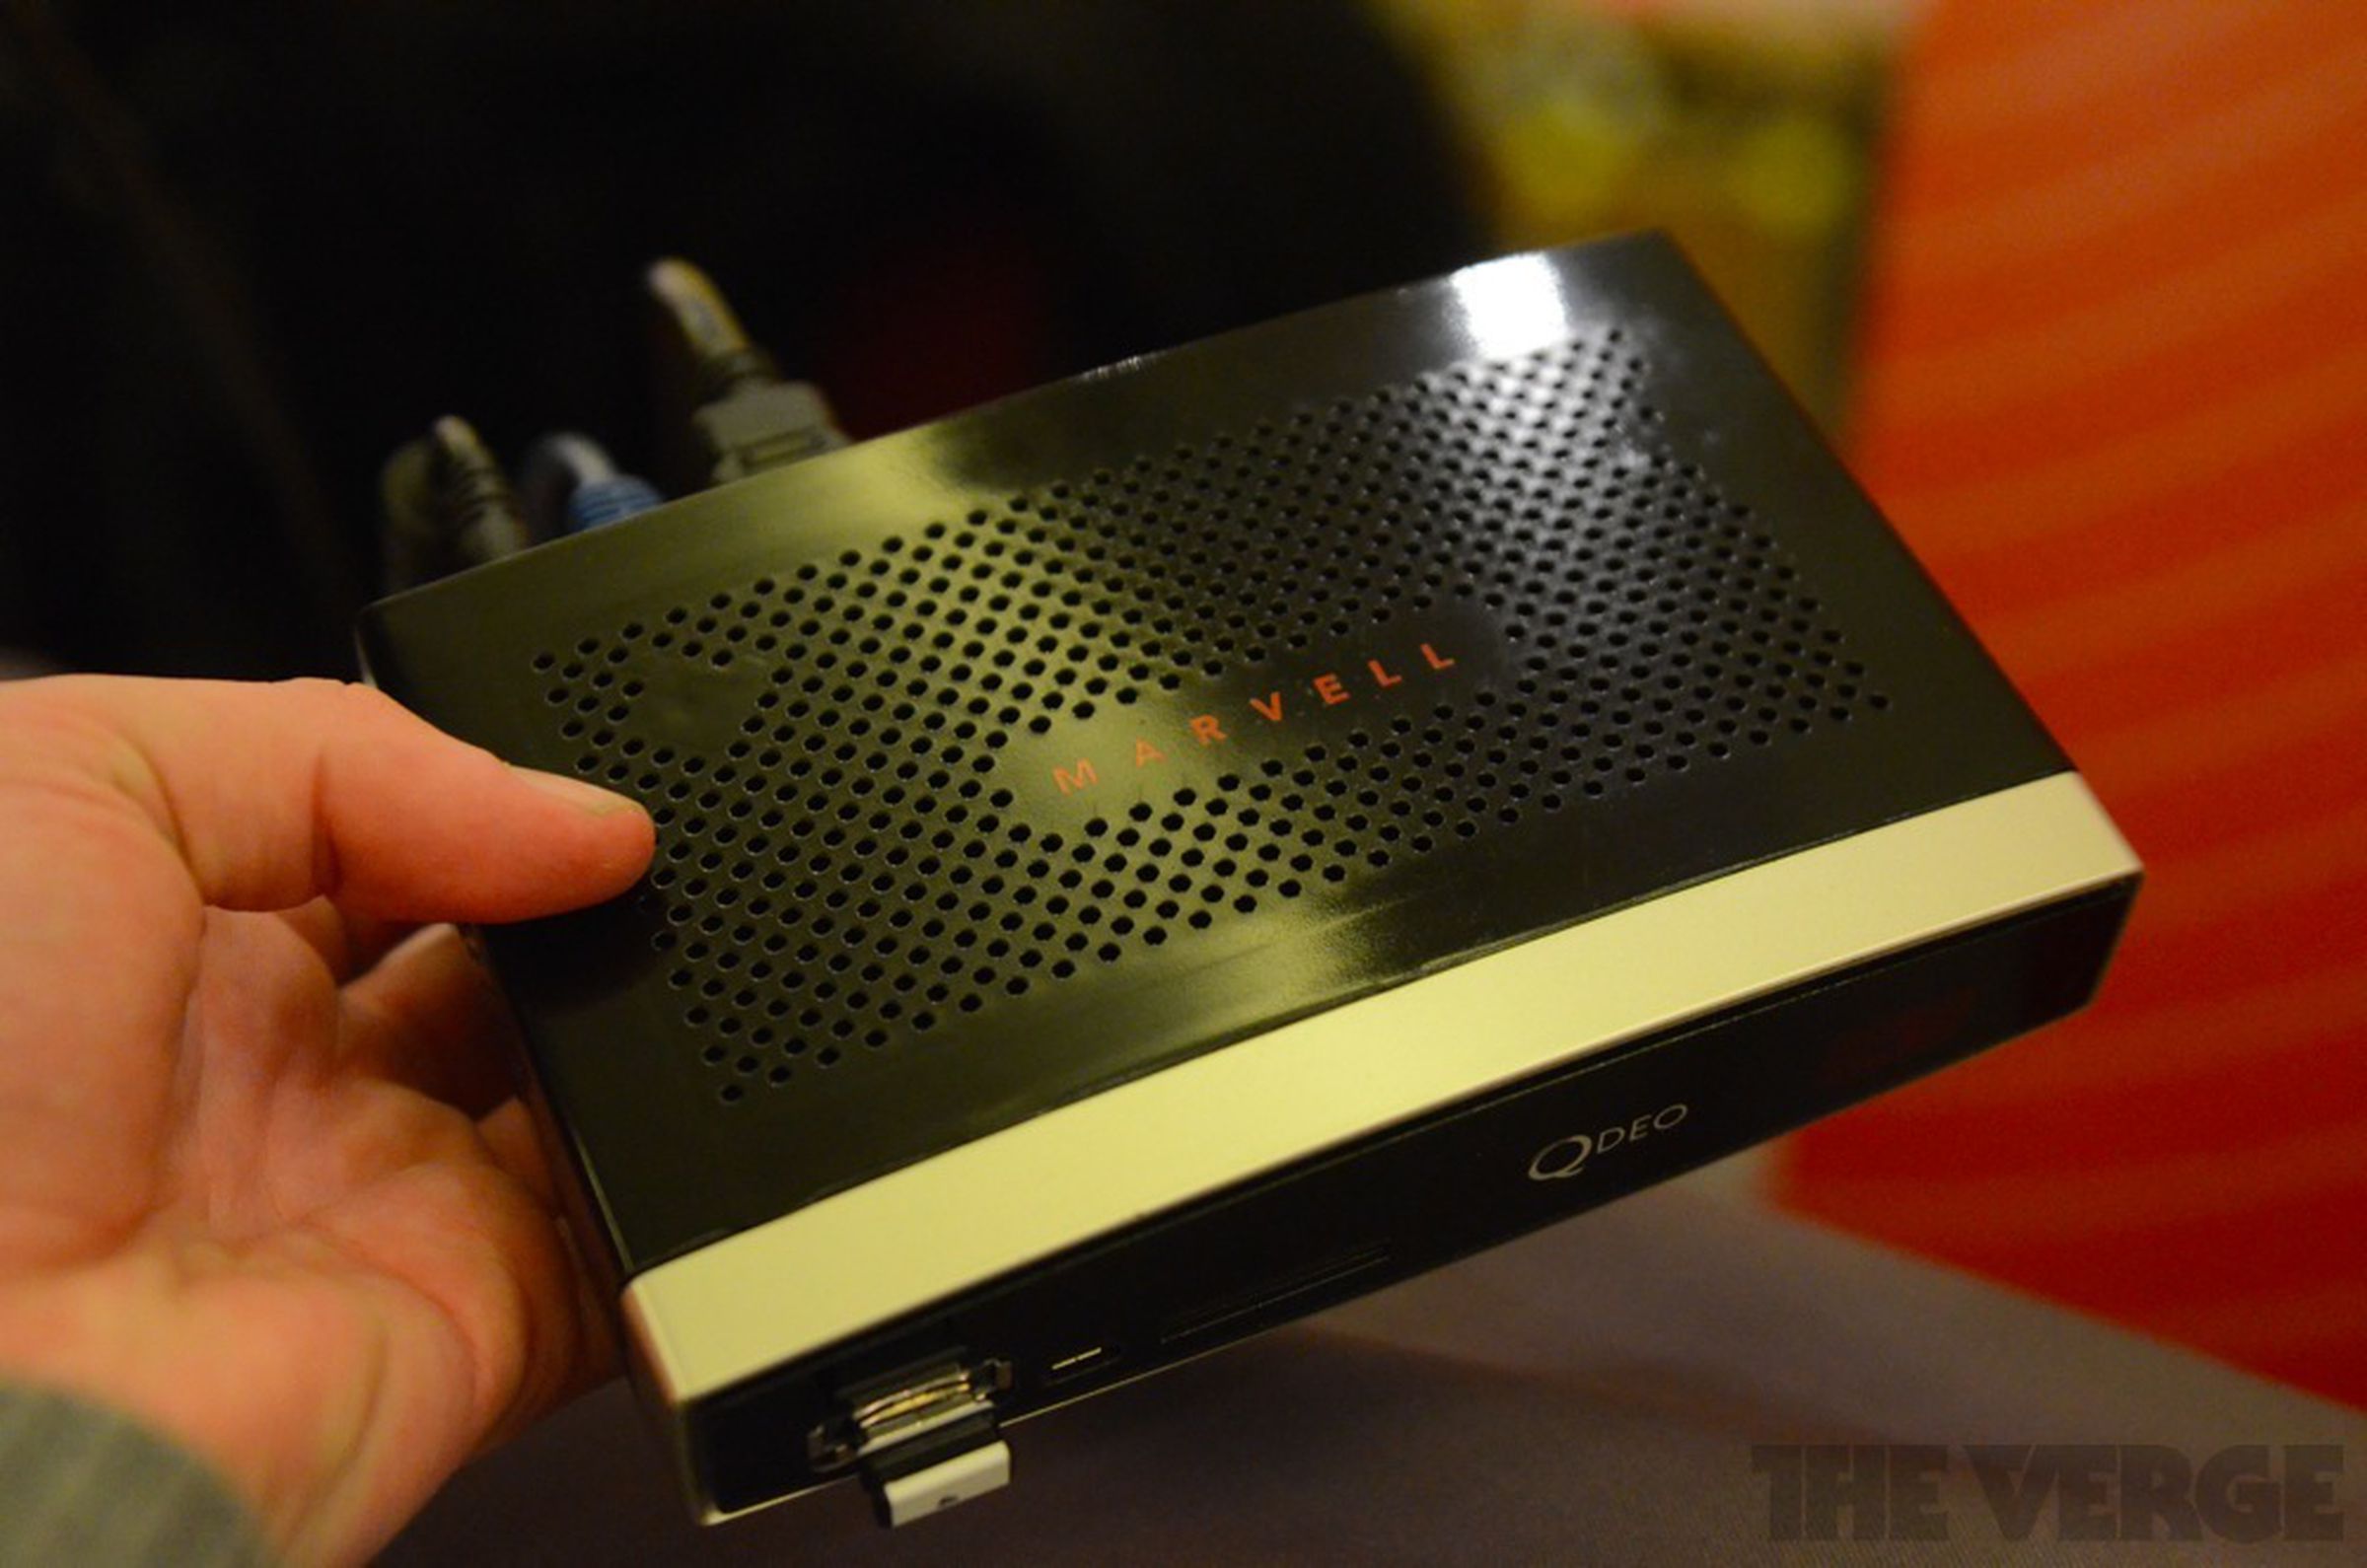 Marvell Armada 1500 for Google TV hands-on